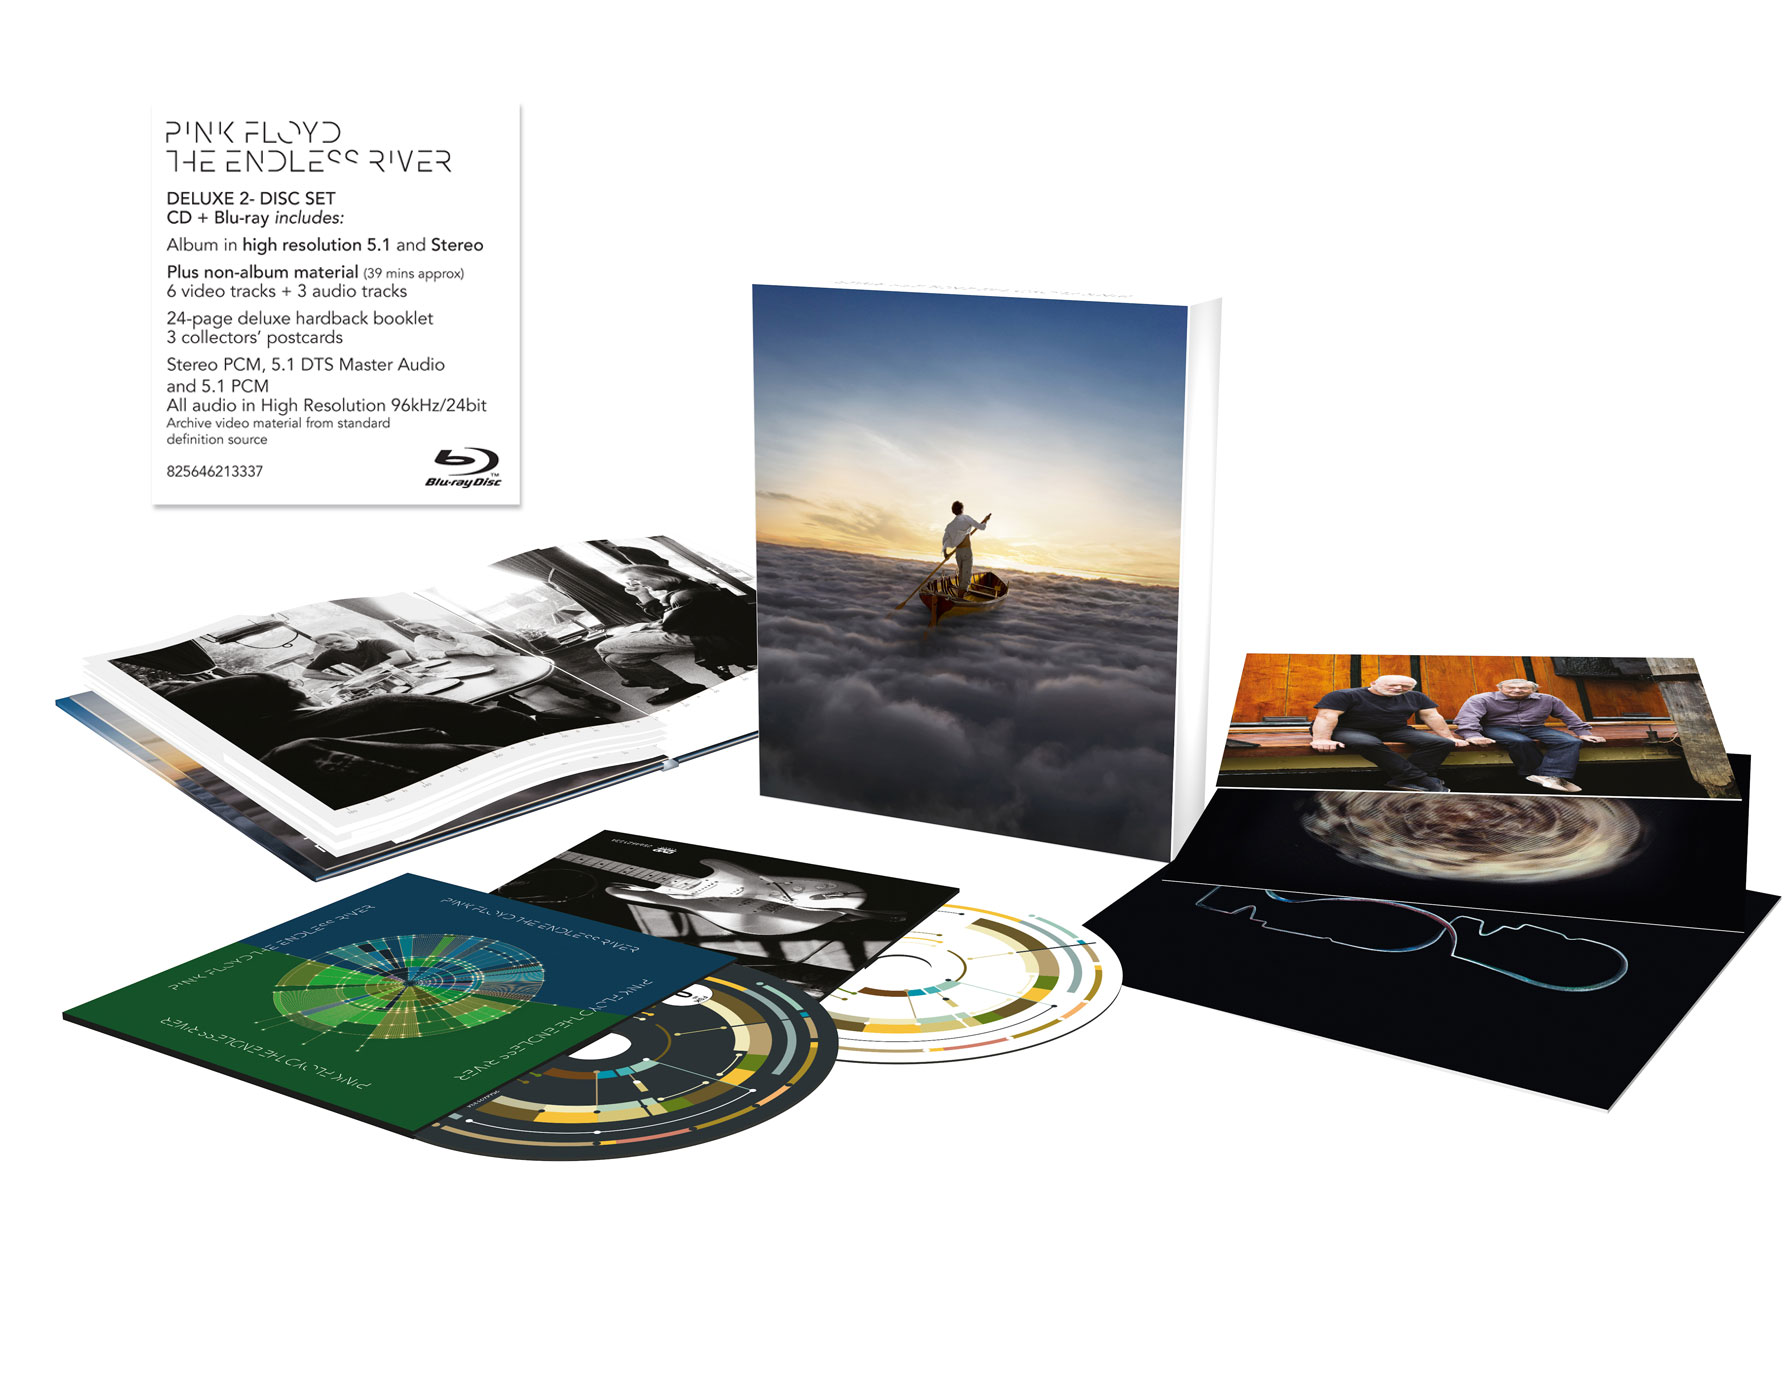 Amazoncom: Pink Floyd: The Story of Wish You Were Here